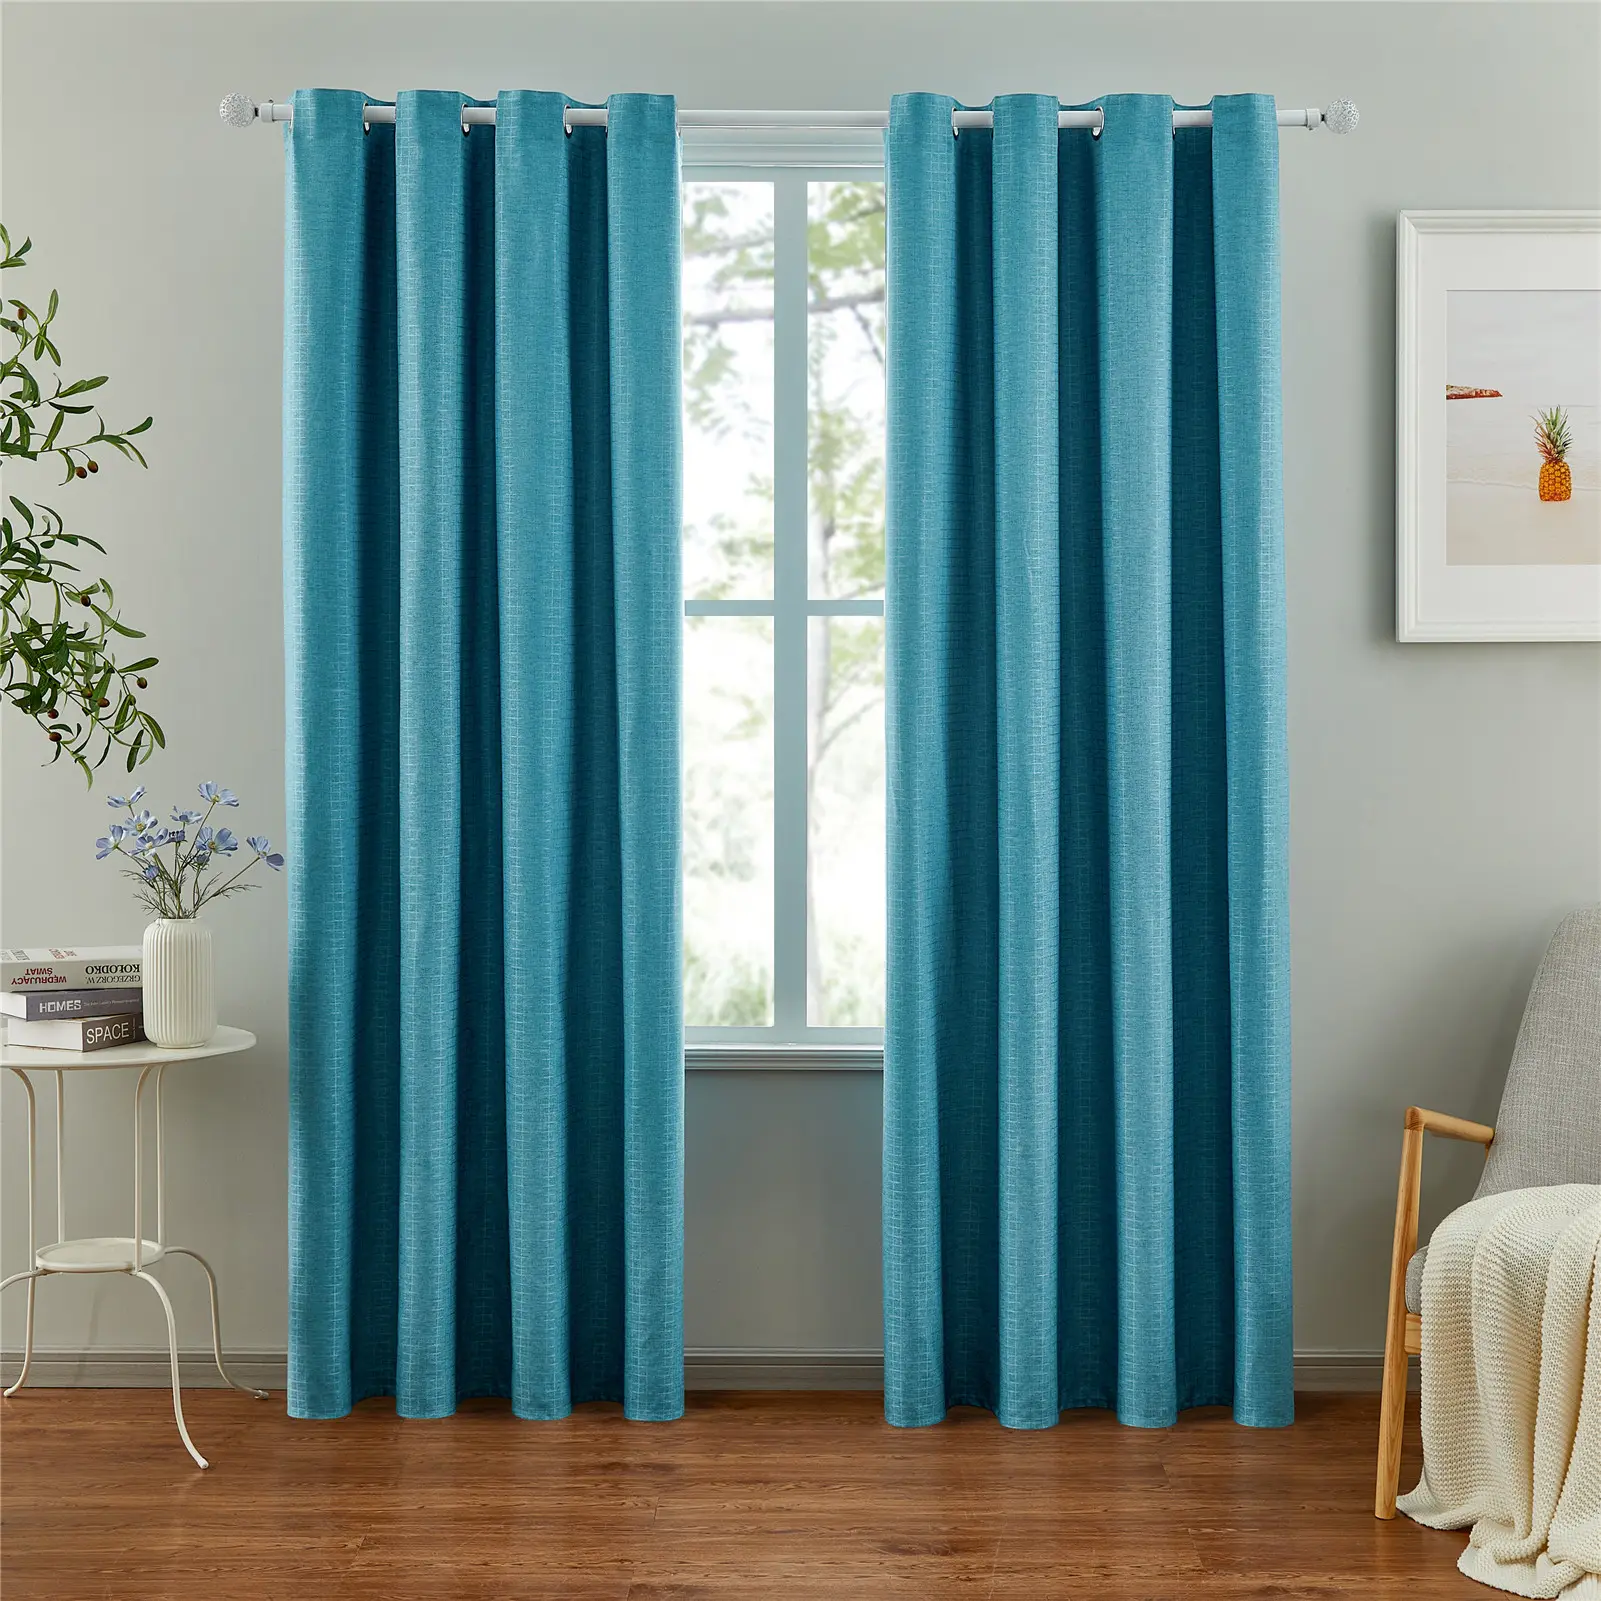 Luxury Curtain for the Living Room Window Curtains Square Shape Jacquard Blackout Curtain for Home